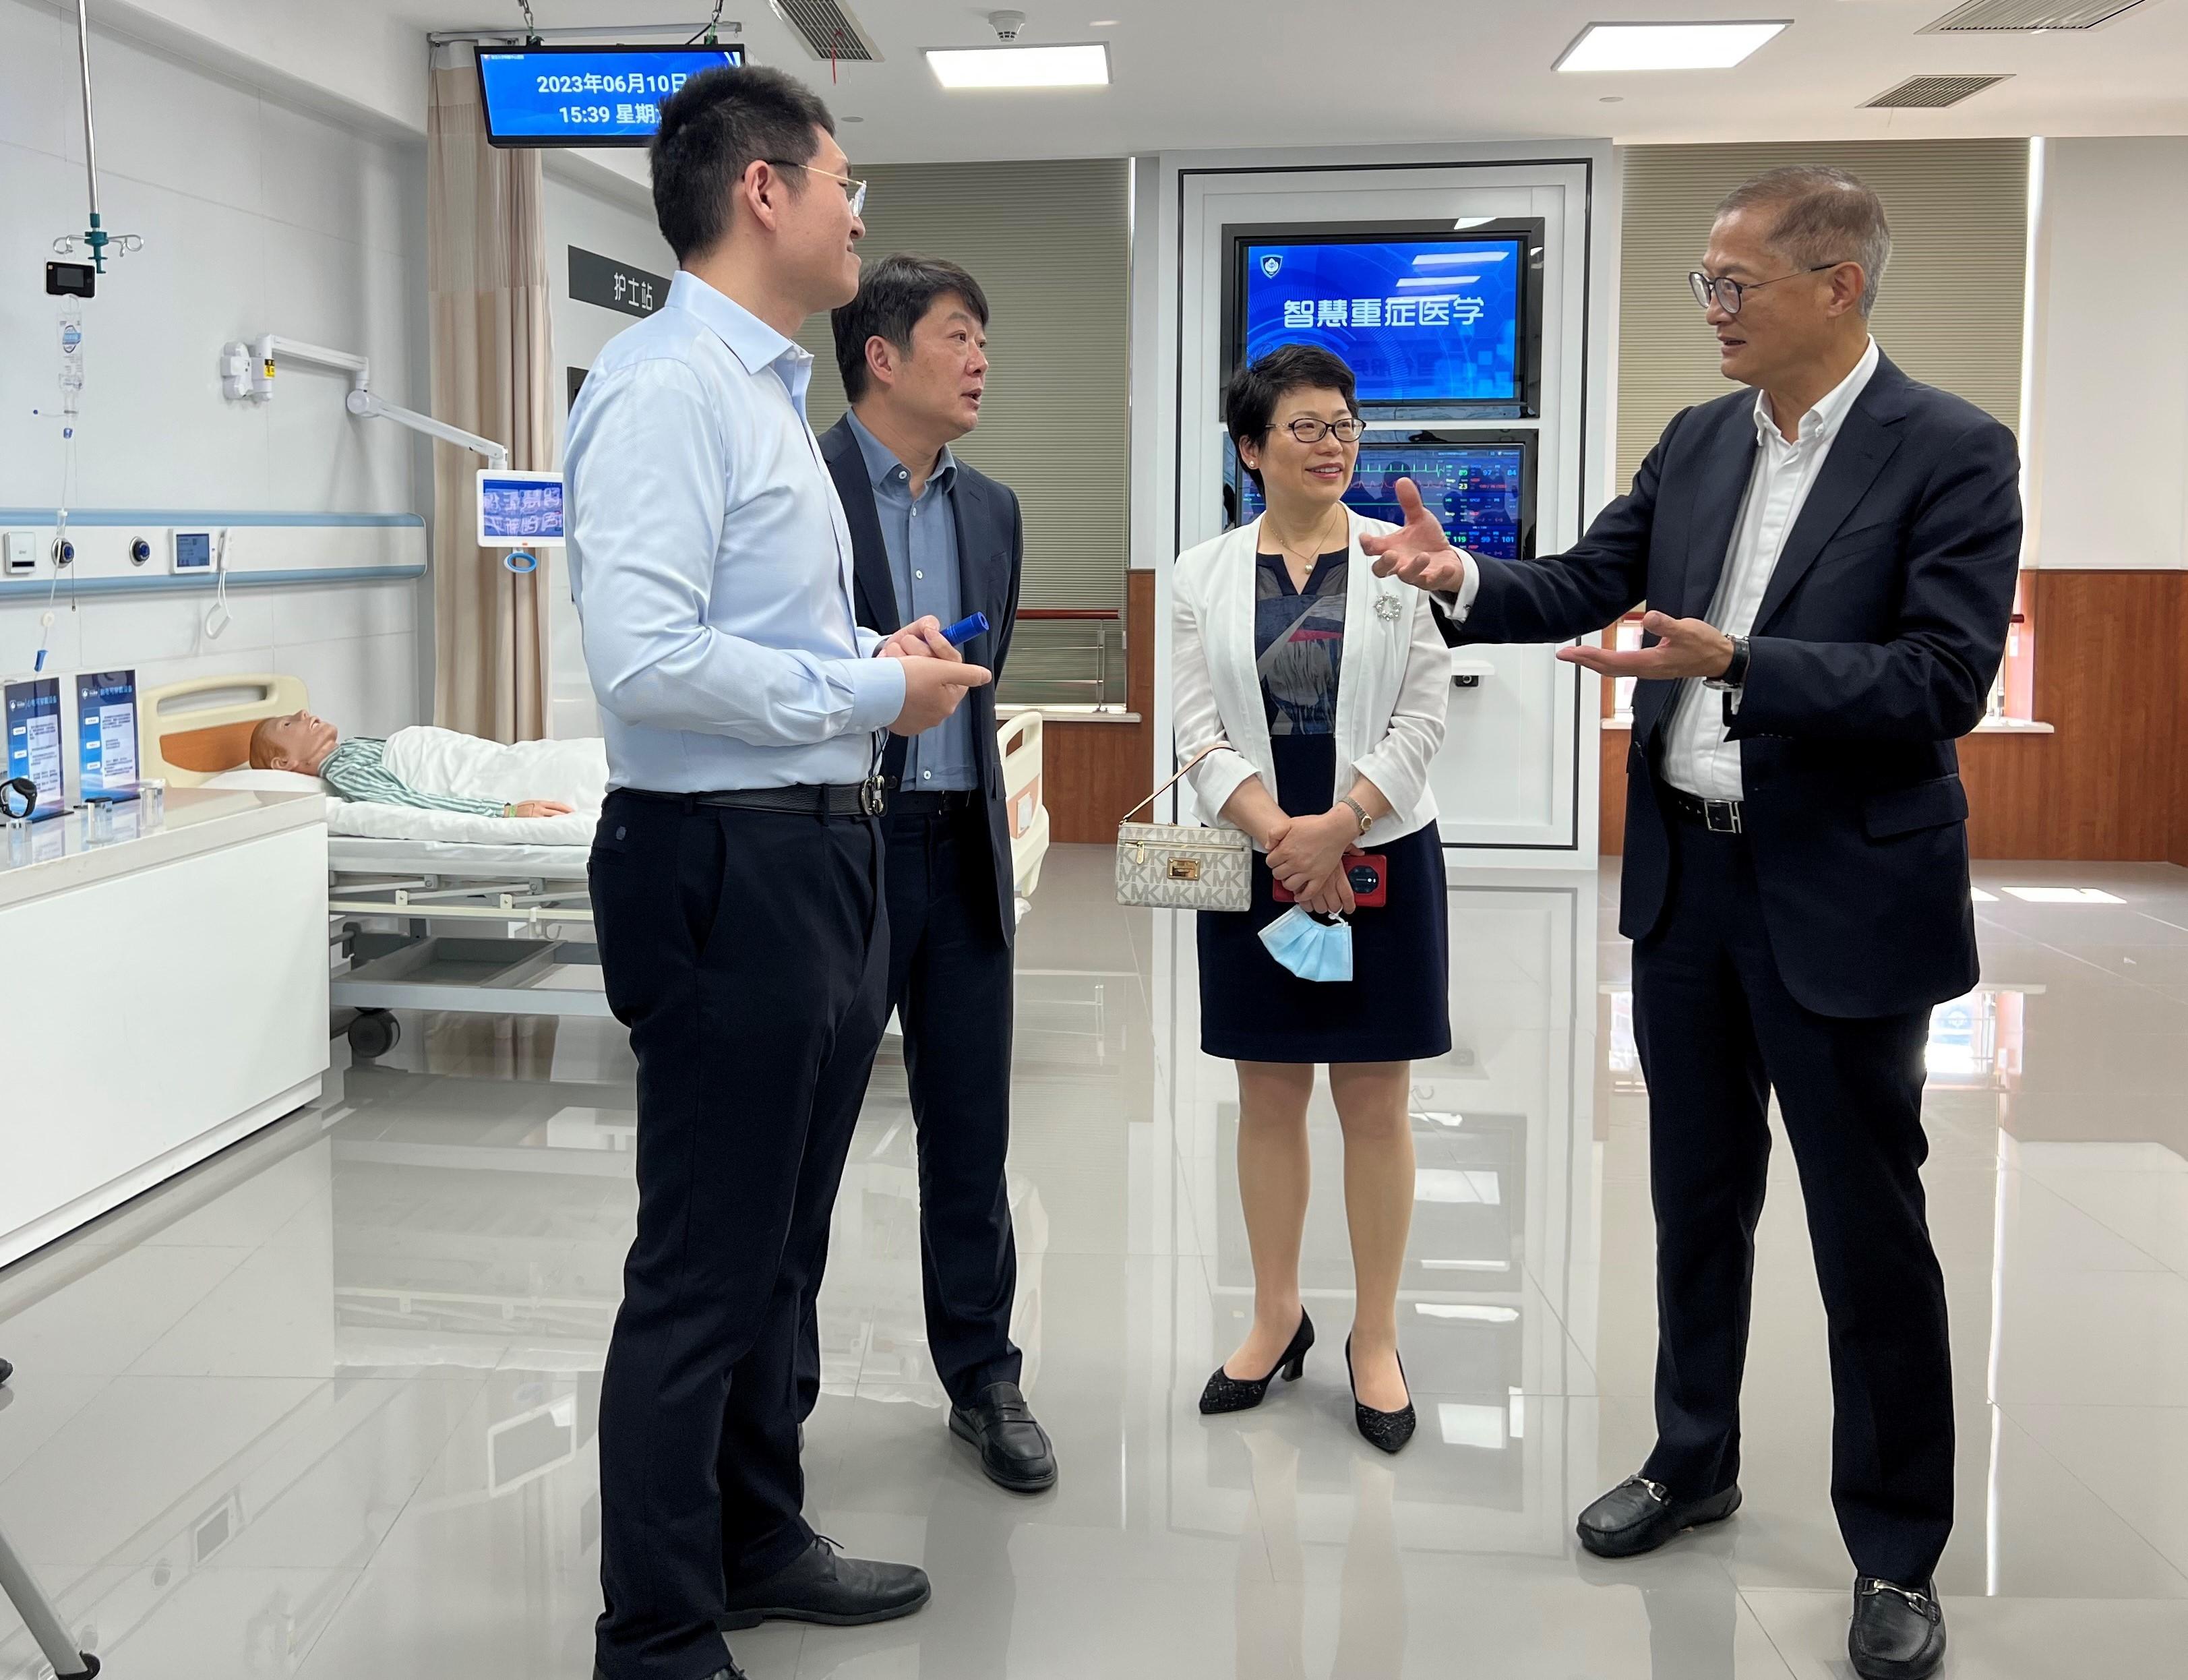 The Secretary for Health, Professor Lo Chung-mau (first right), toured the Exhibition Centre on Smart Healthcare of Zhongshan Hospital affiliated to Fudan University today (June 10) to learn about the hospital’s effort in enhancing treatment quality and user experience for patients through the operation as a smart hospital. Next to him are Deputy Director of the Shanghai Municipal Health Commission Mr Yu Tao (third right) and Vice President of the hospital Dr Gu Jianying (second right).